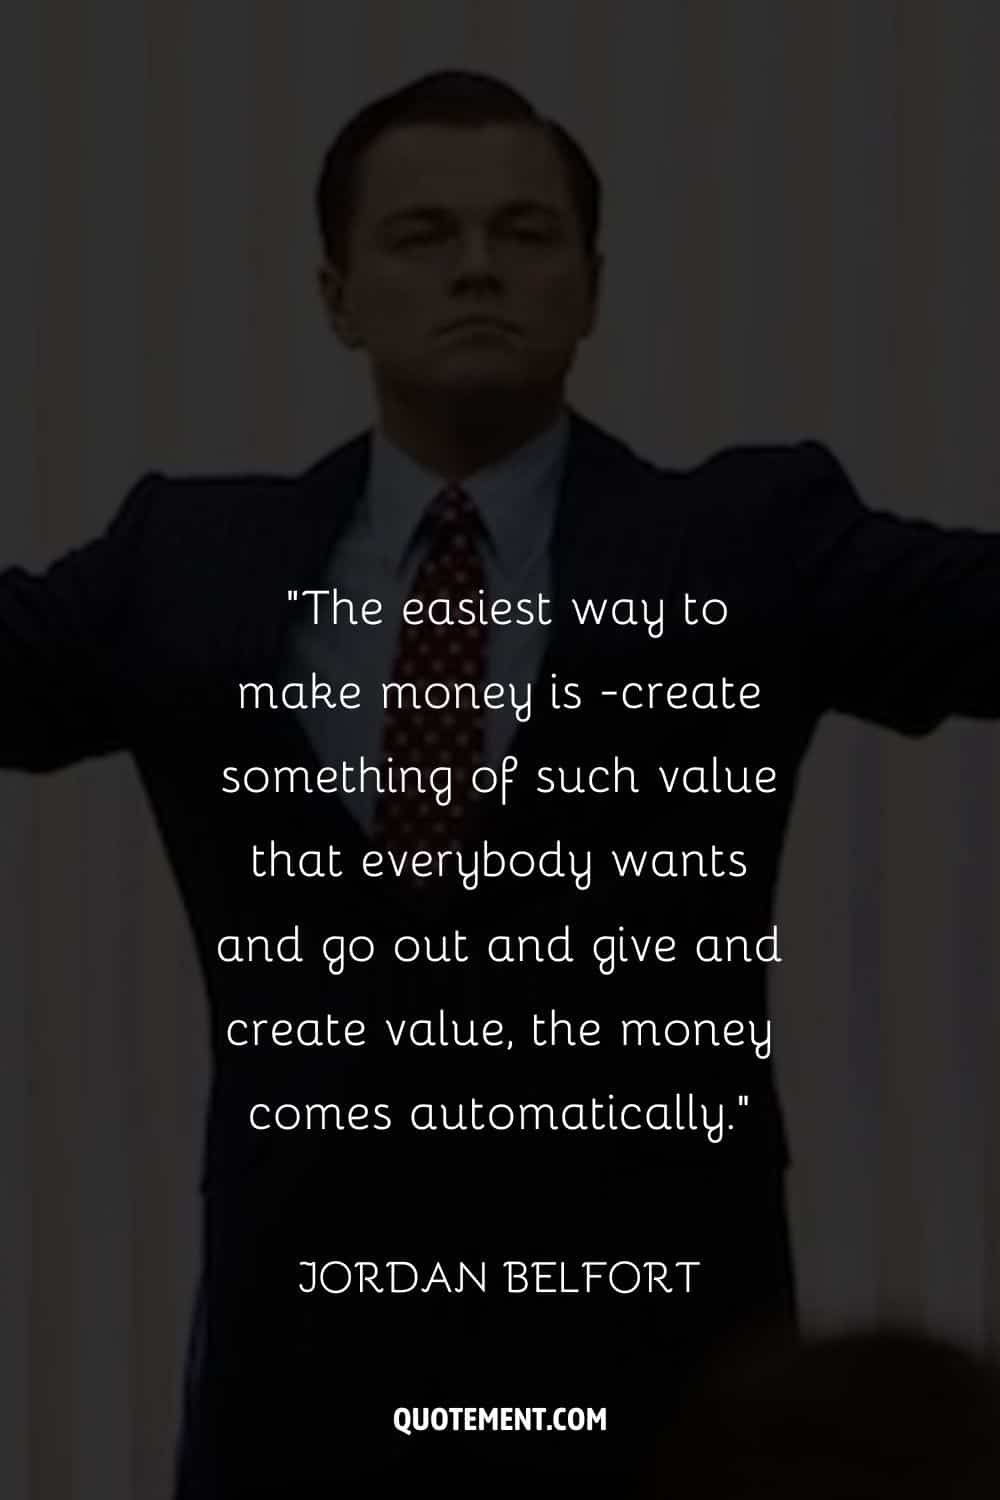 The charismatic Leonardo DiCaprio in a suit representing wolf of wall street motivational quote
